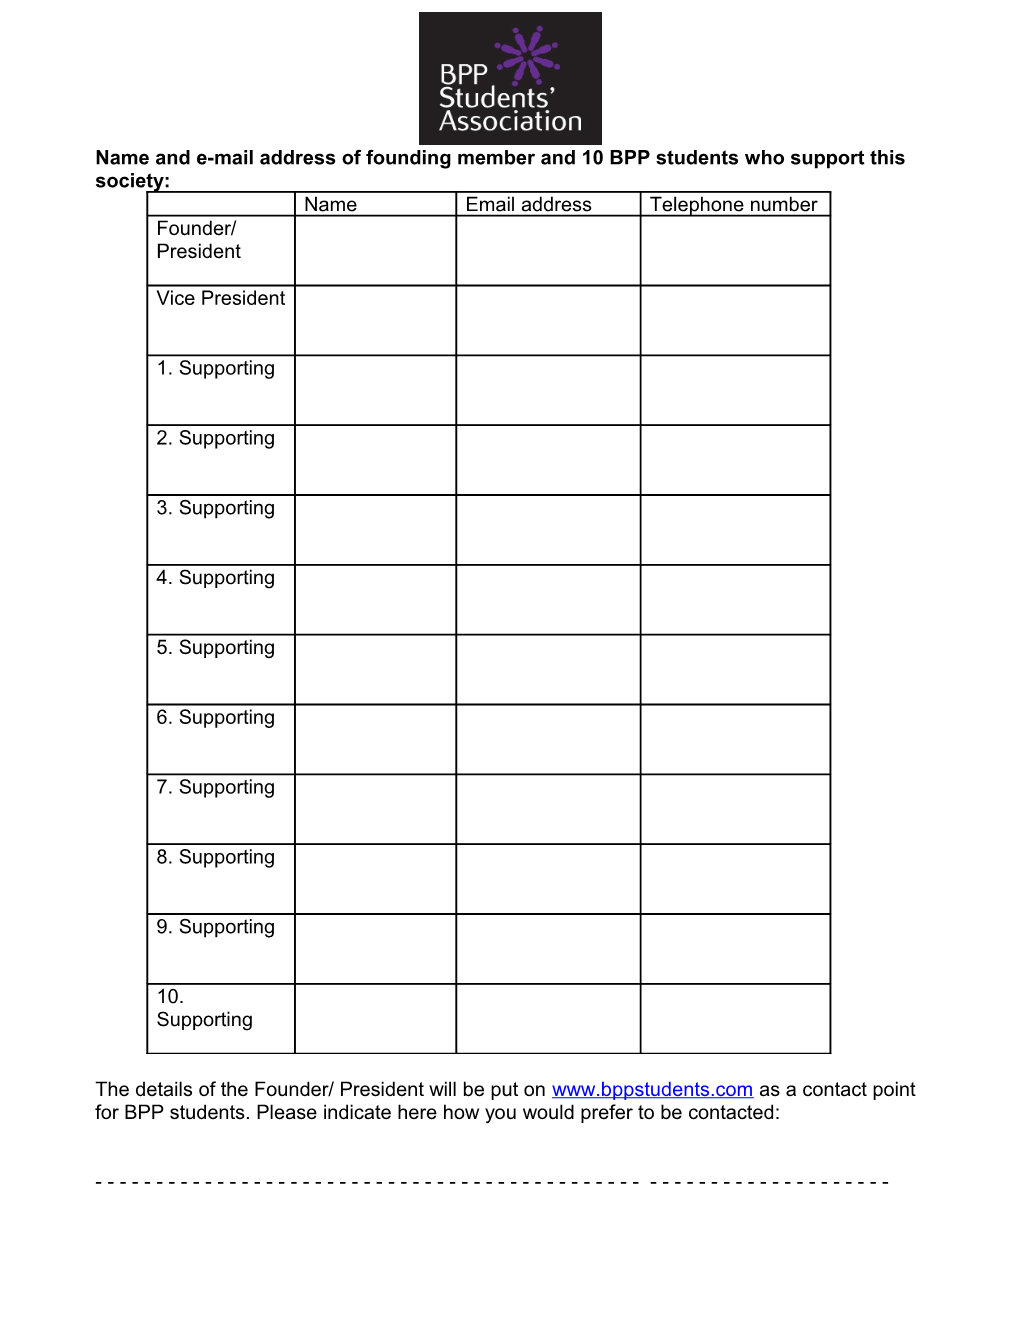 Funding Requisition Form